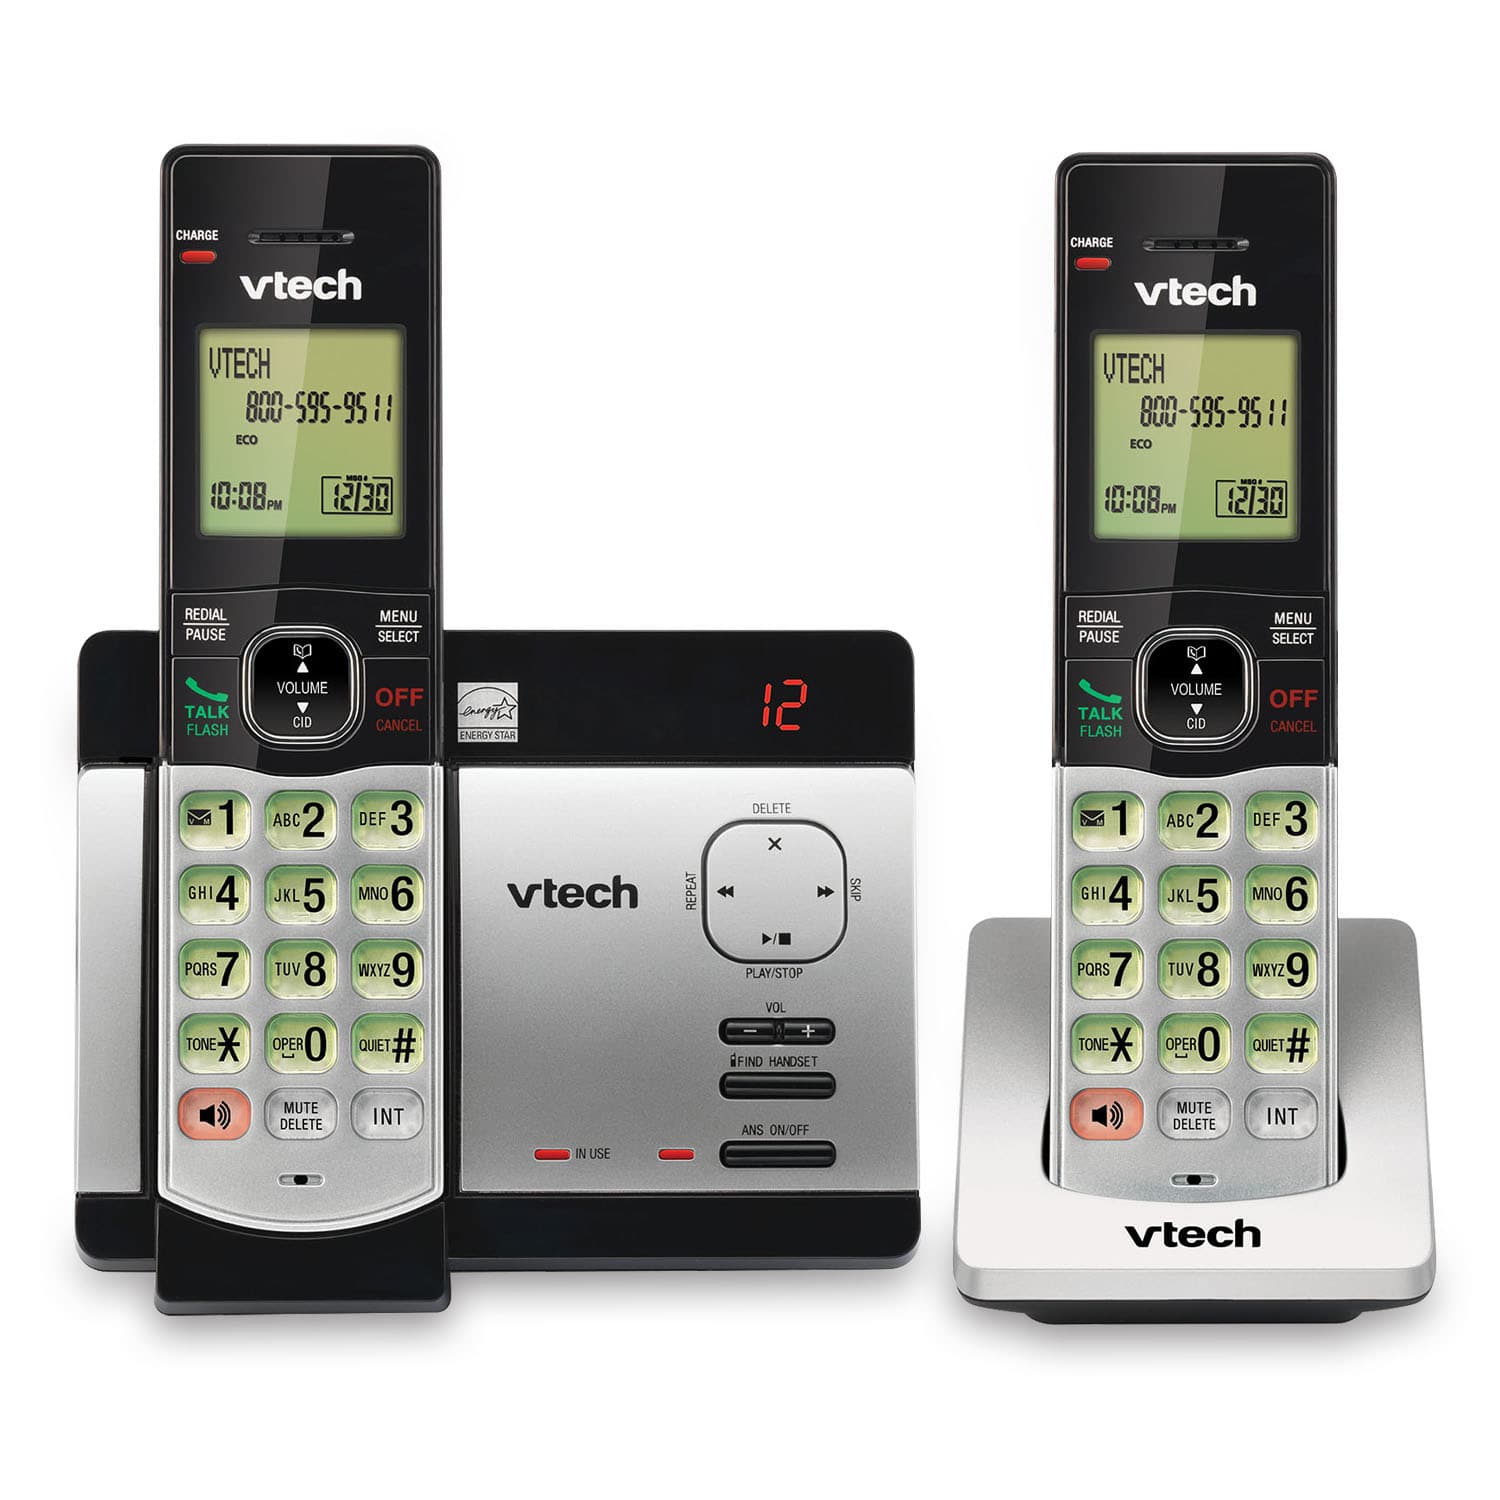 2 Handset Cordless Phone System with Caller ID/Call Waiting - view 1